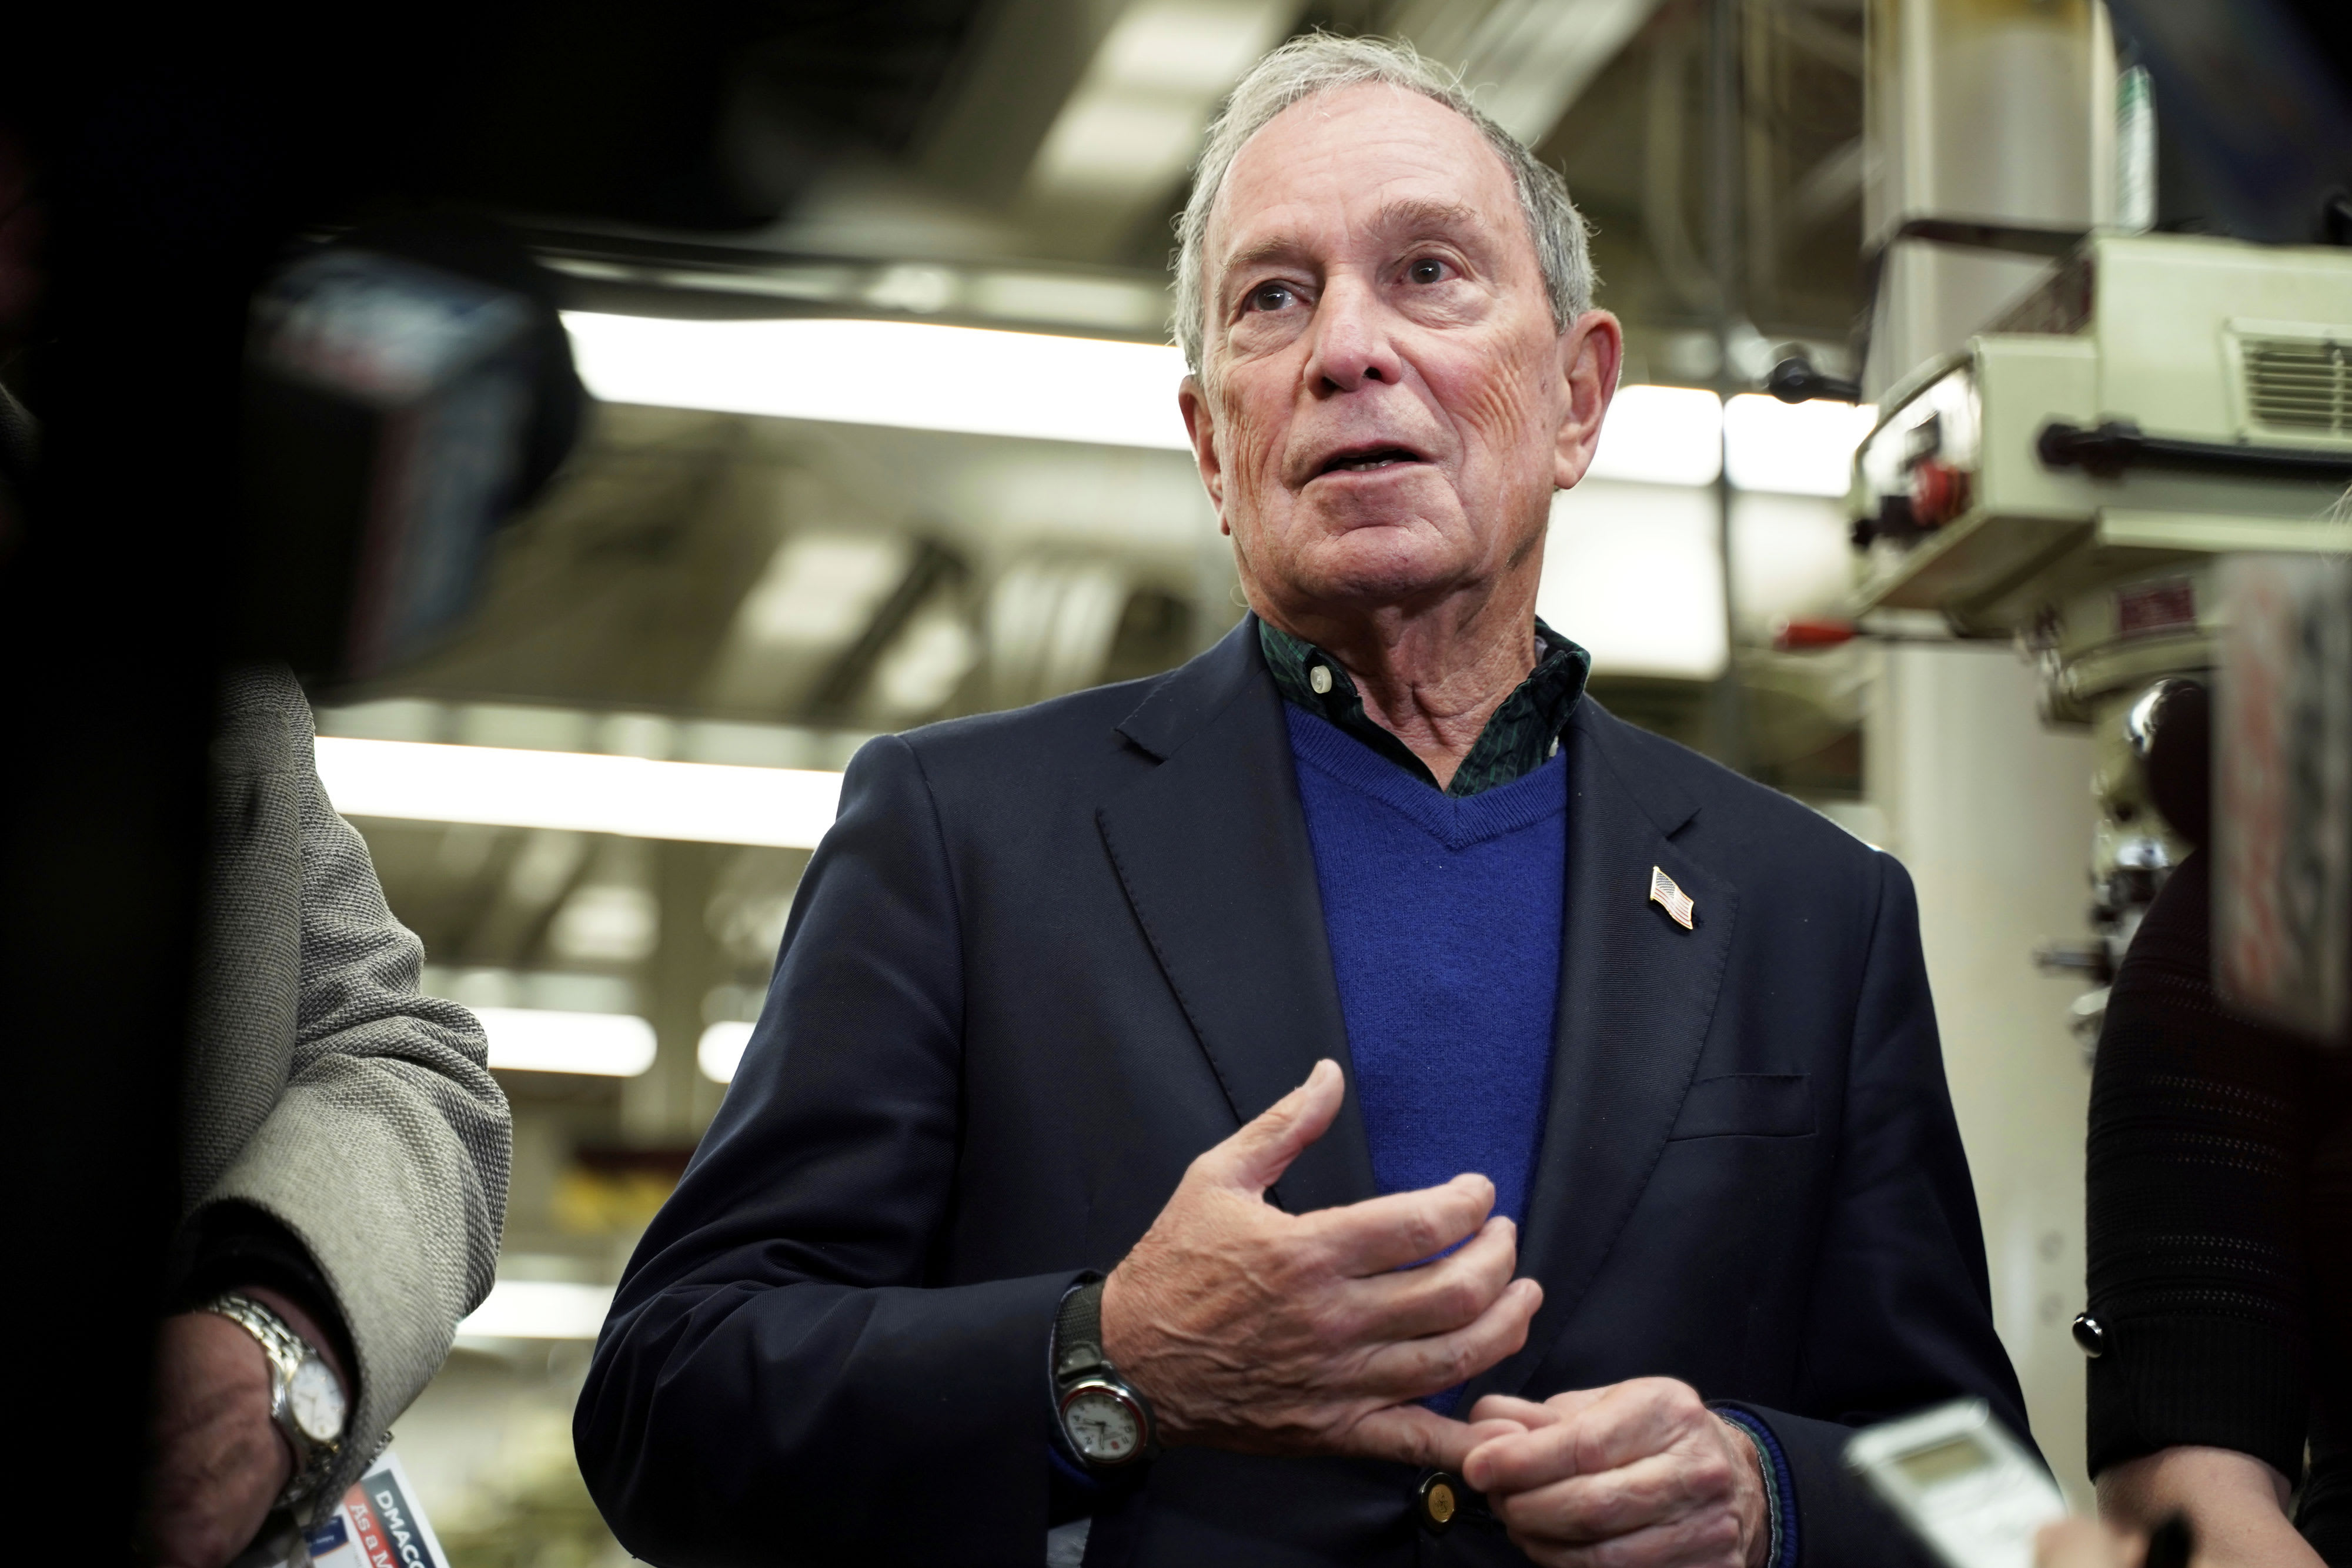 Bloomberg Information will not examine Mike Bloomberg or Democratic rivals